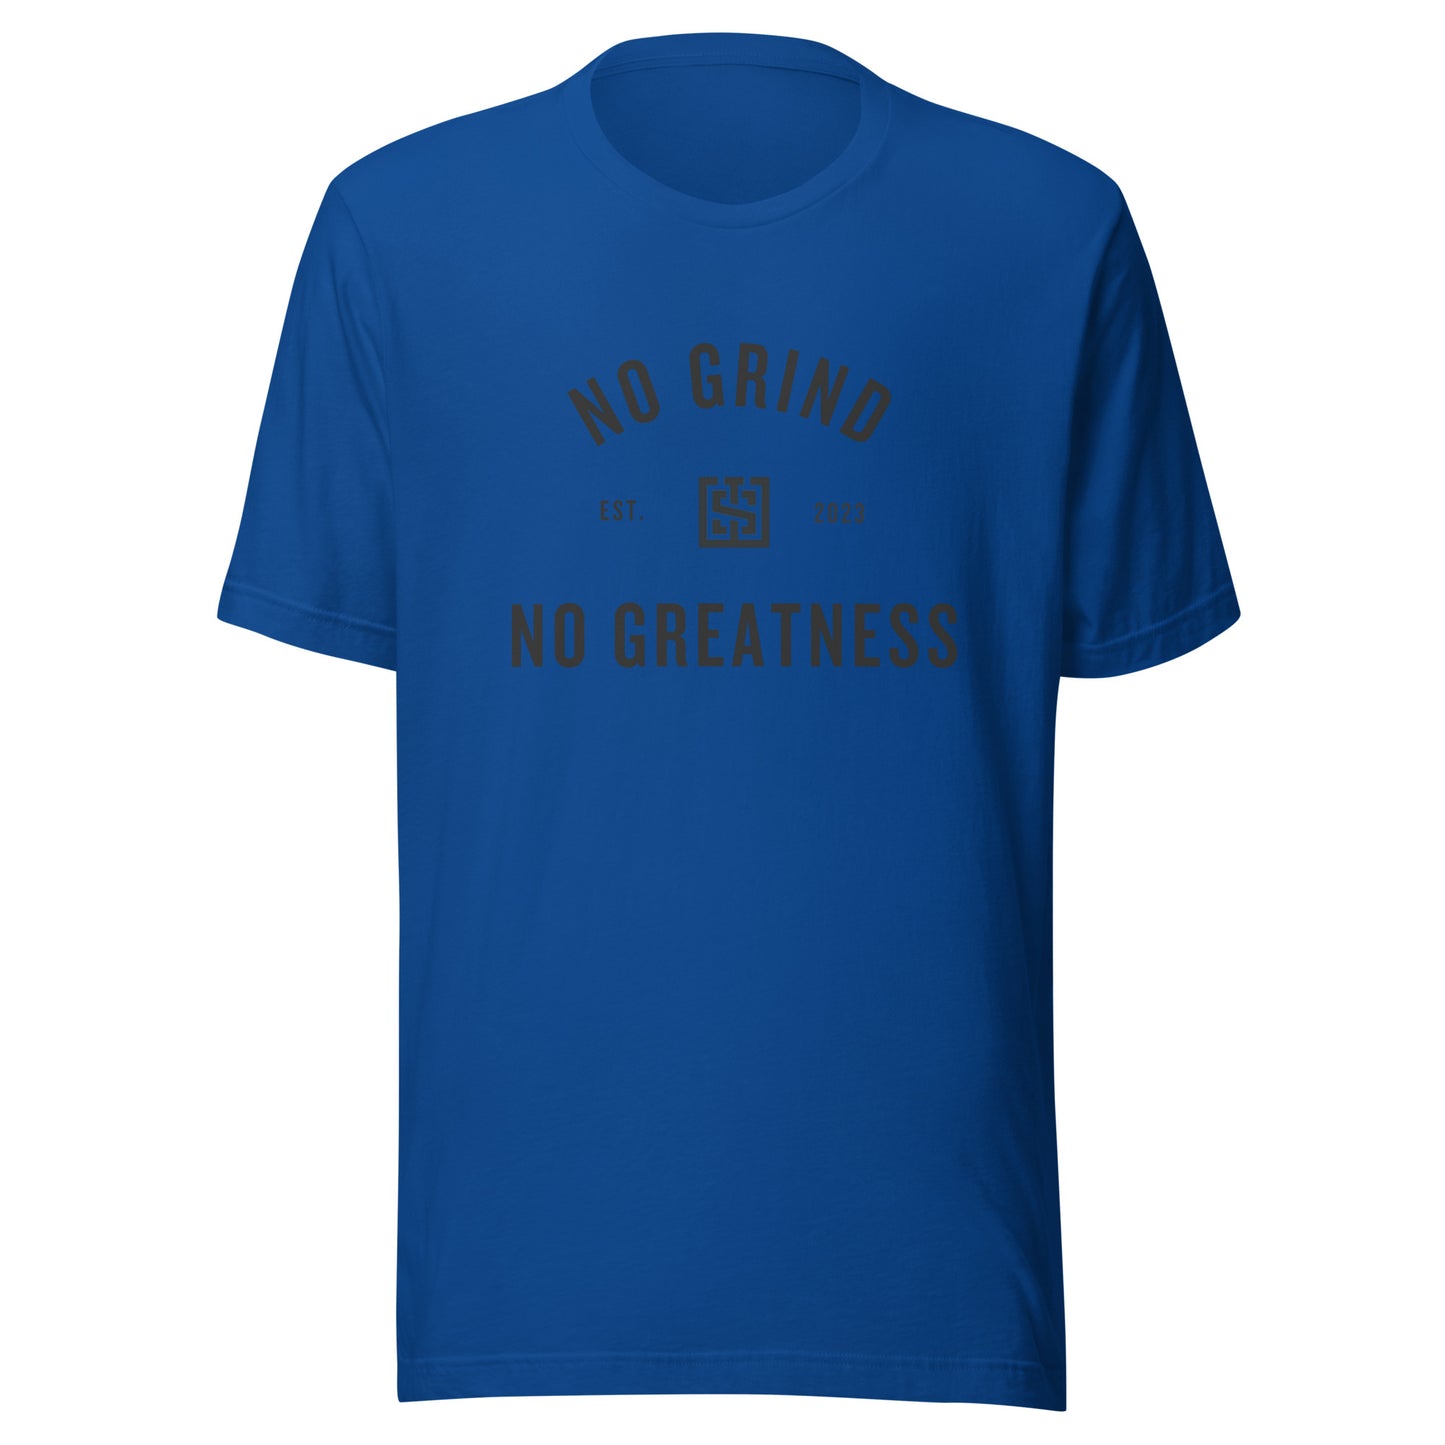 No Grind No Greatness Unisex T-shirt (Black Lettering)